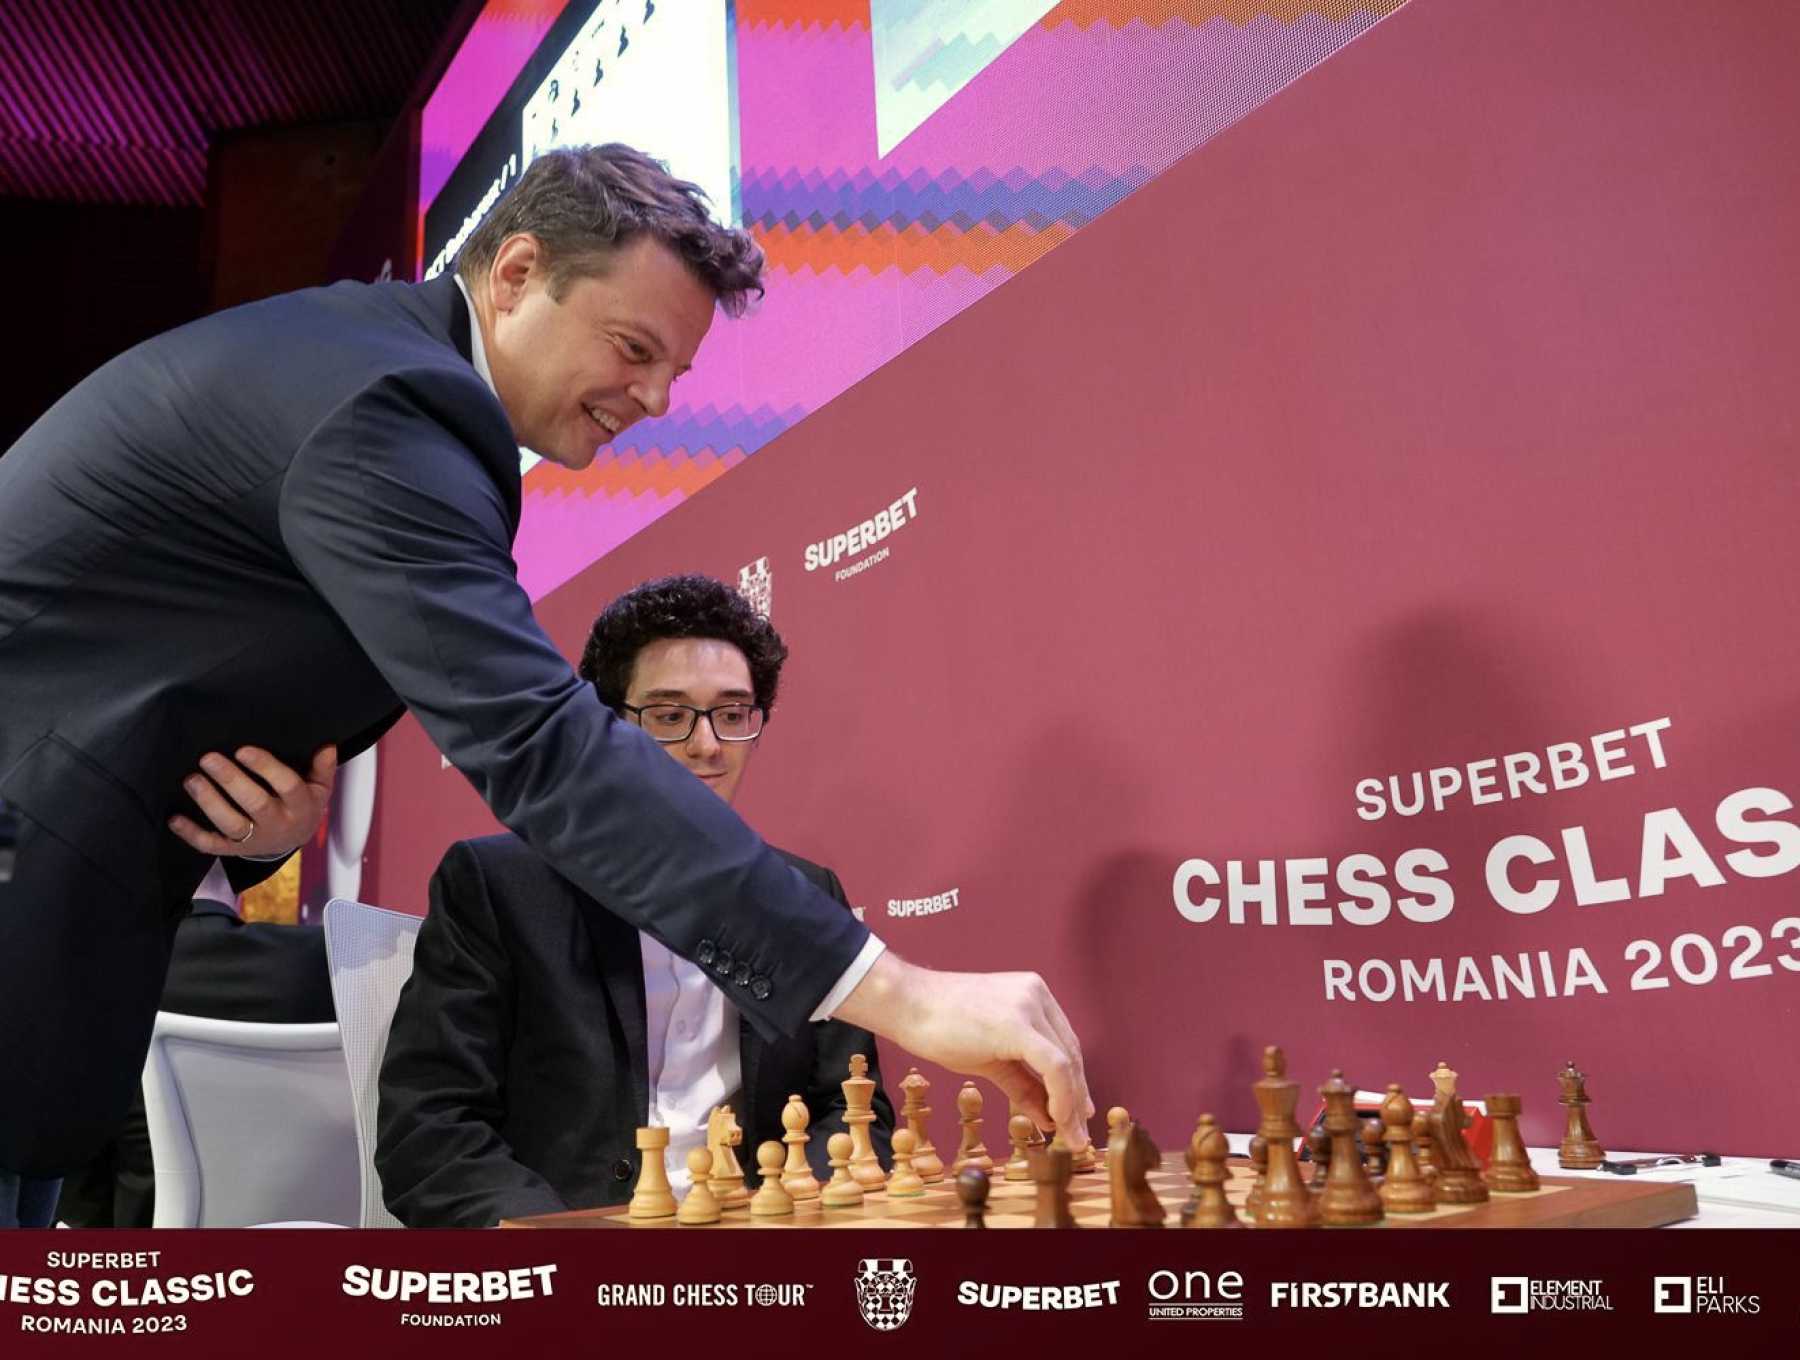 Andrei Diaconescu kicked off the ceremonial first move with the winner of this year's Superbet Chess Classic Romania